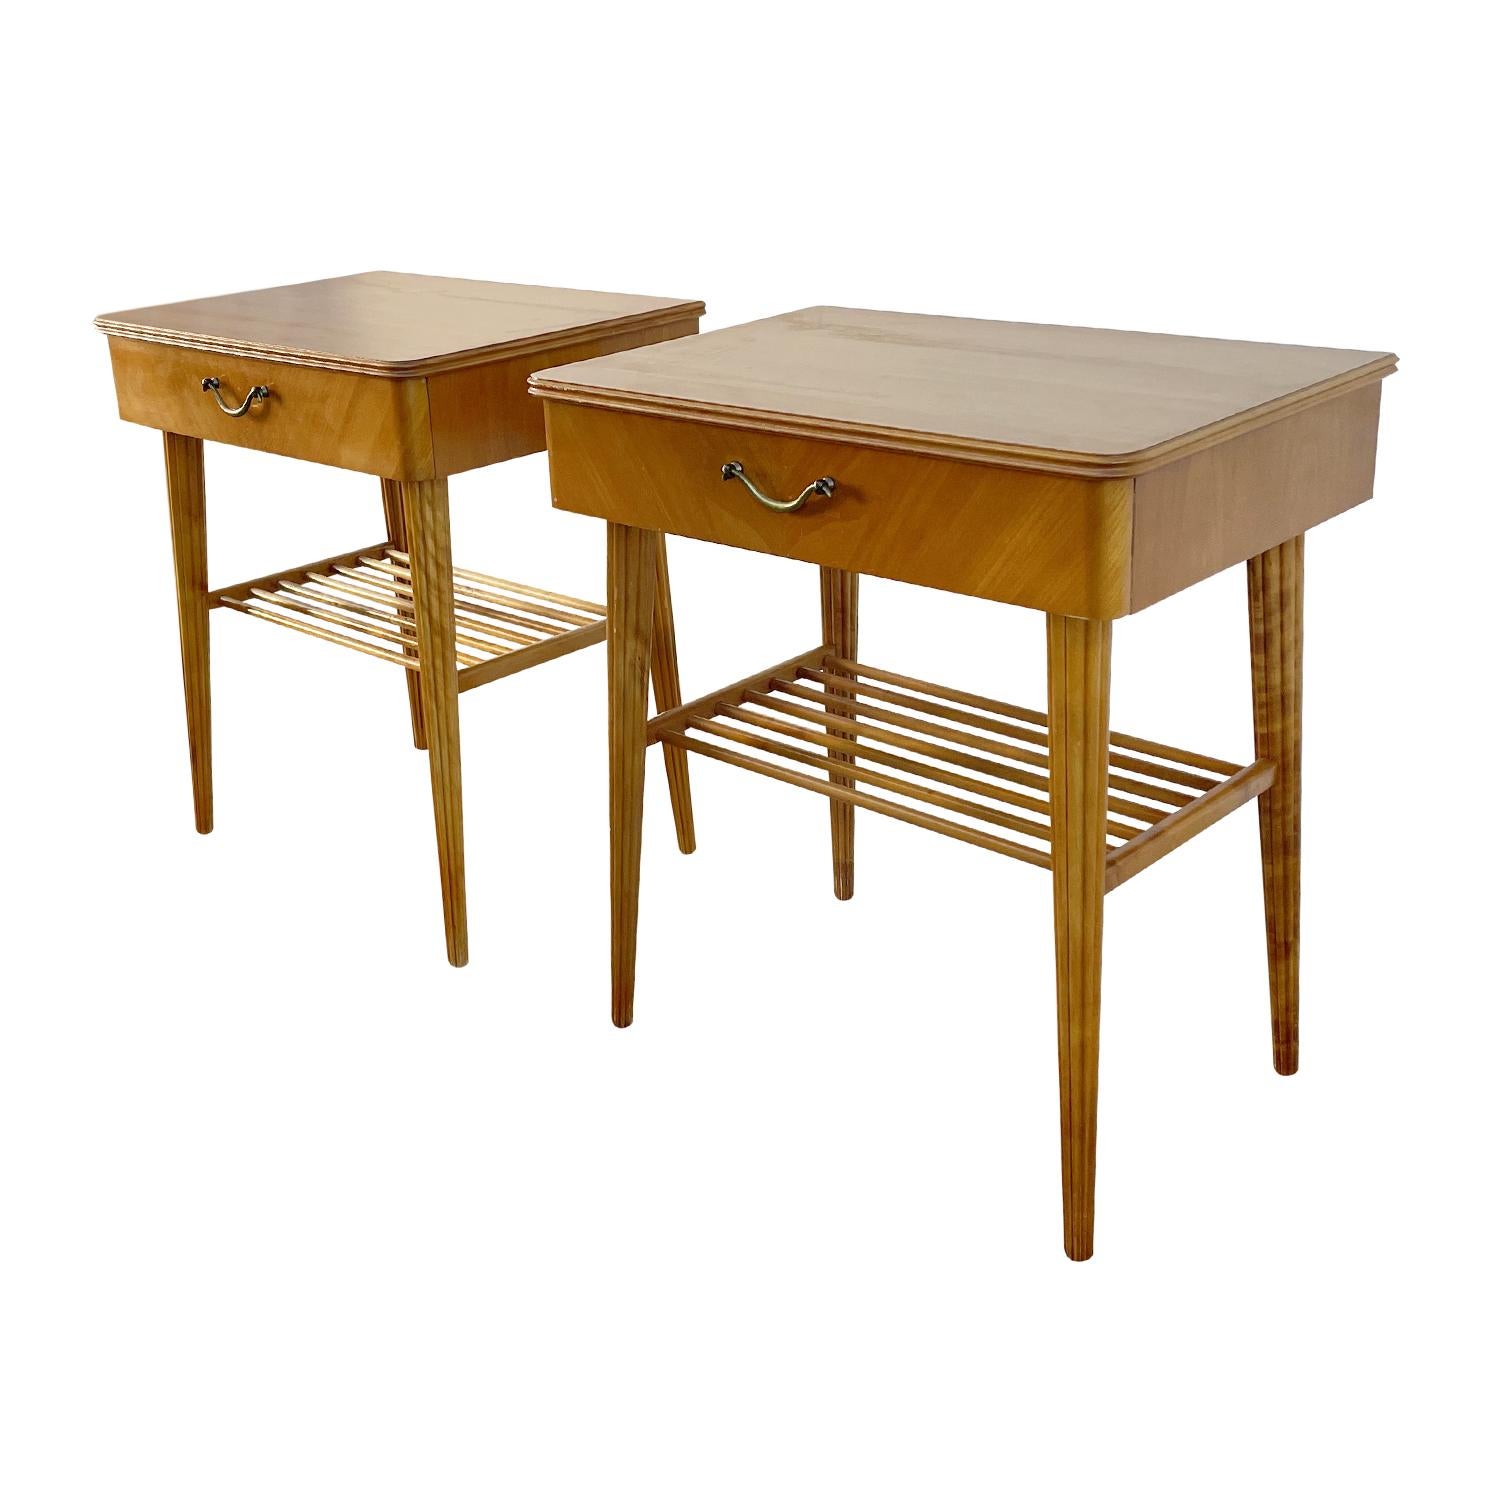 20th Century Danish Pair of Birchwood Nightstands - Vintage Brass Bedside Tables For Sale 4